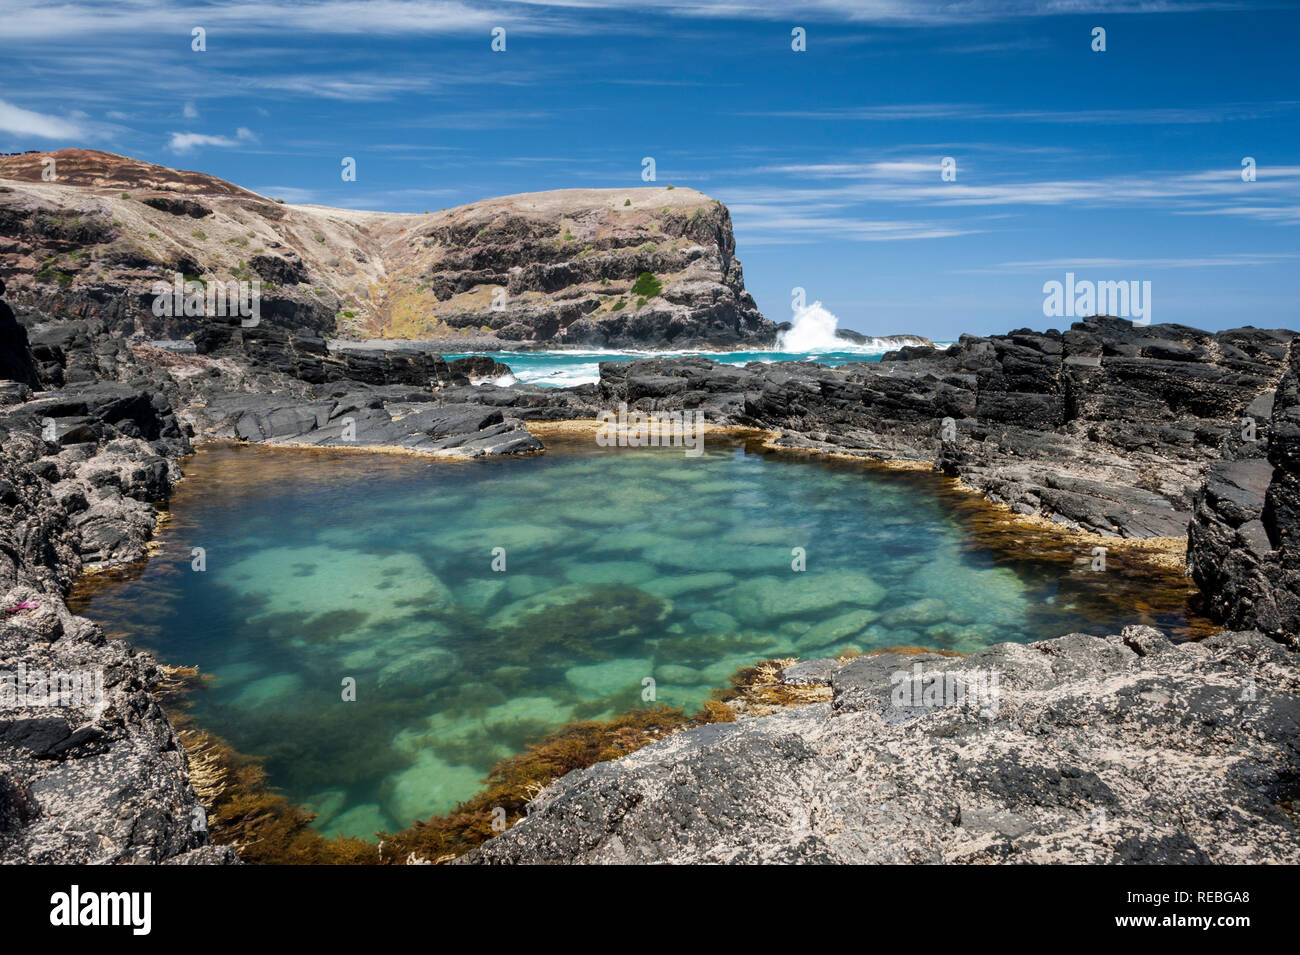 Rock pool in foreground with waves breaking from the ocean in the background, Bushrangers Bay, Victoria Australia Stock Photo